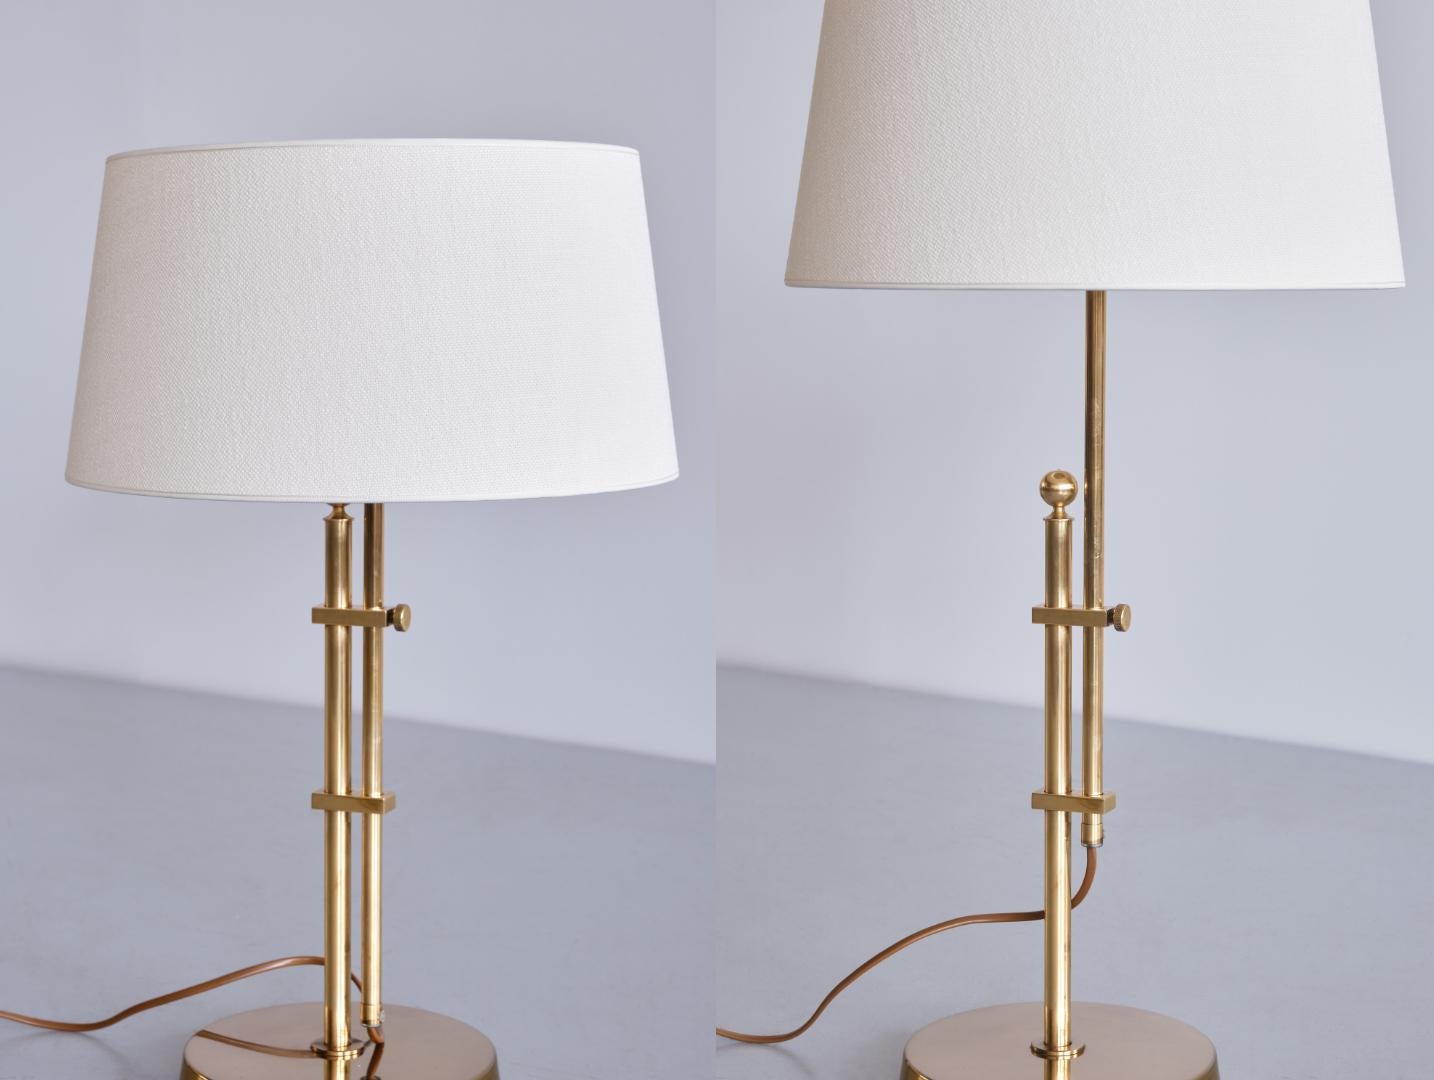 Bergboms B-131 Height Adjustable Table Lamp in Brass, Sweden, 1950s For Sale 5